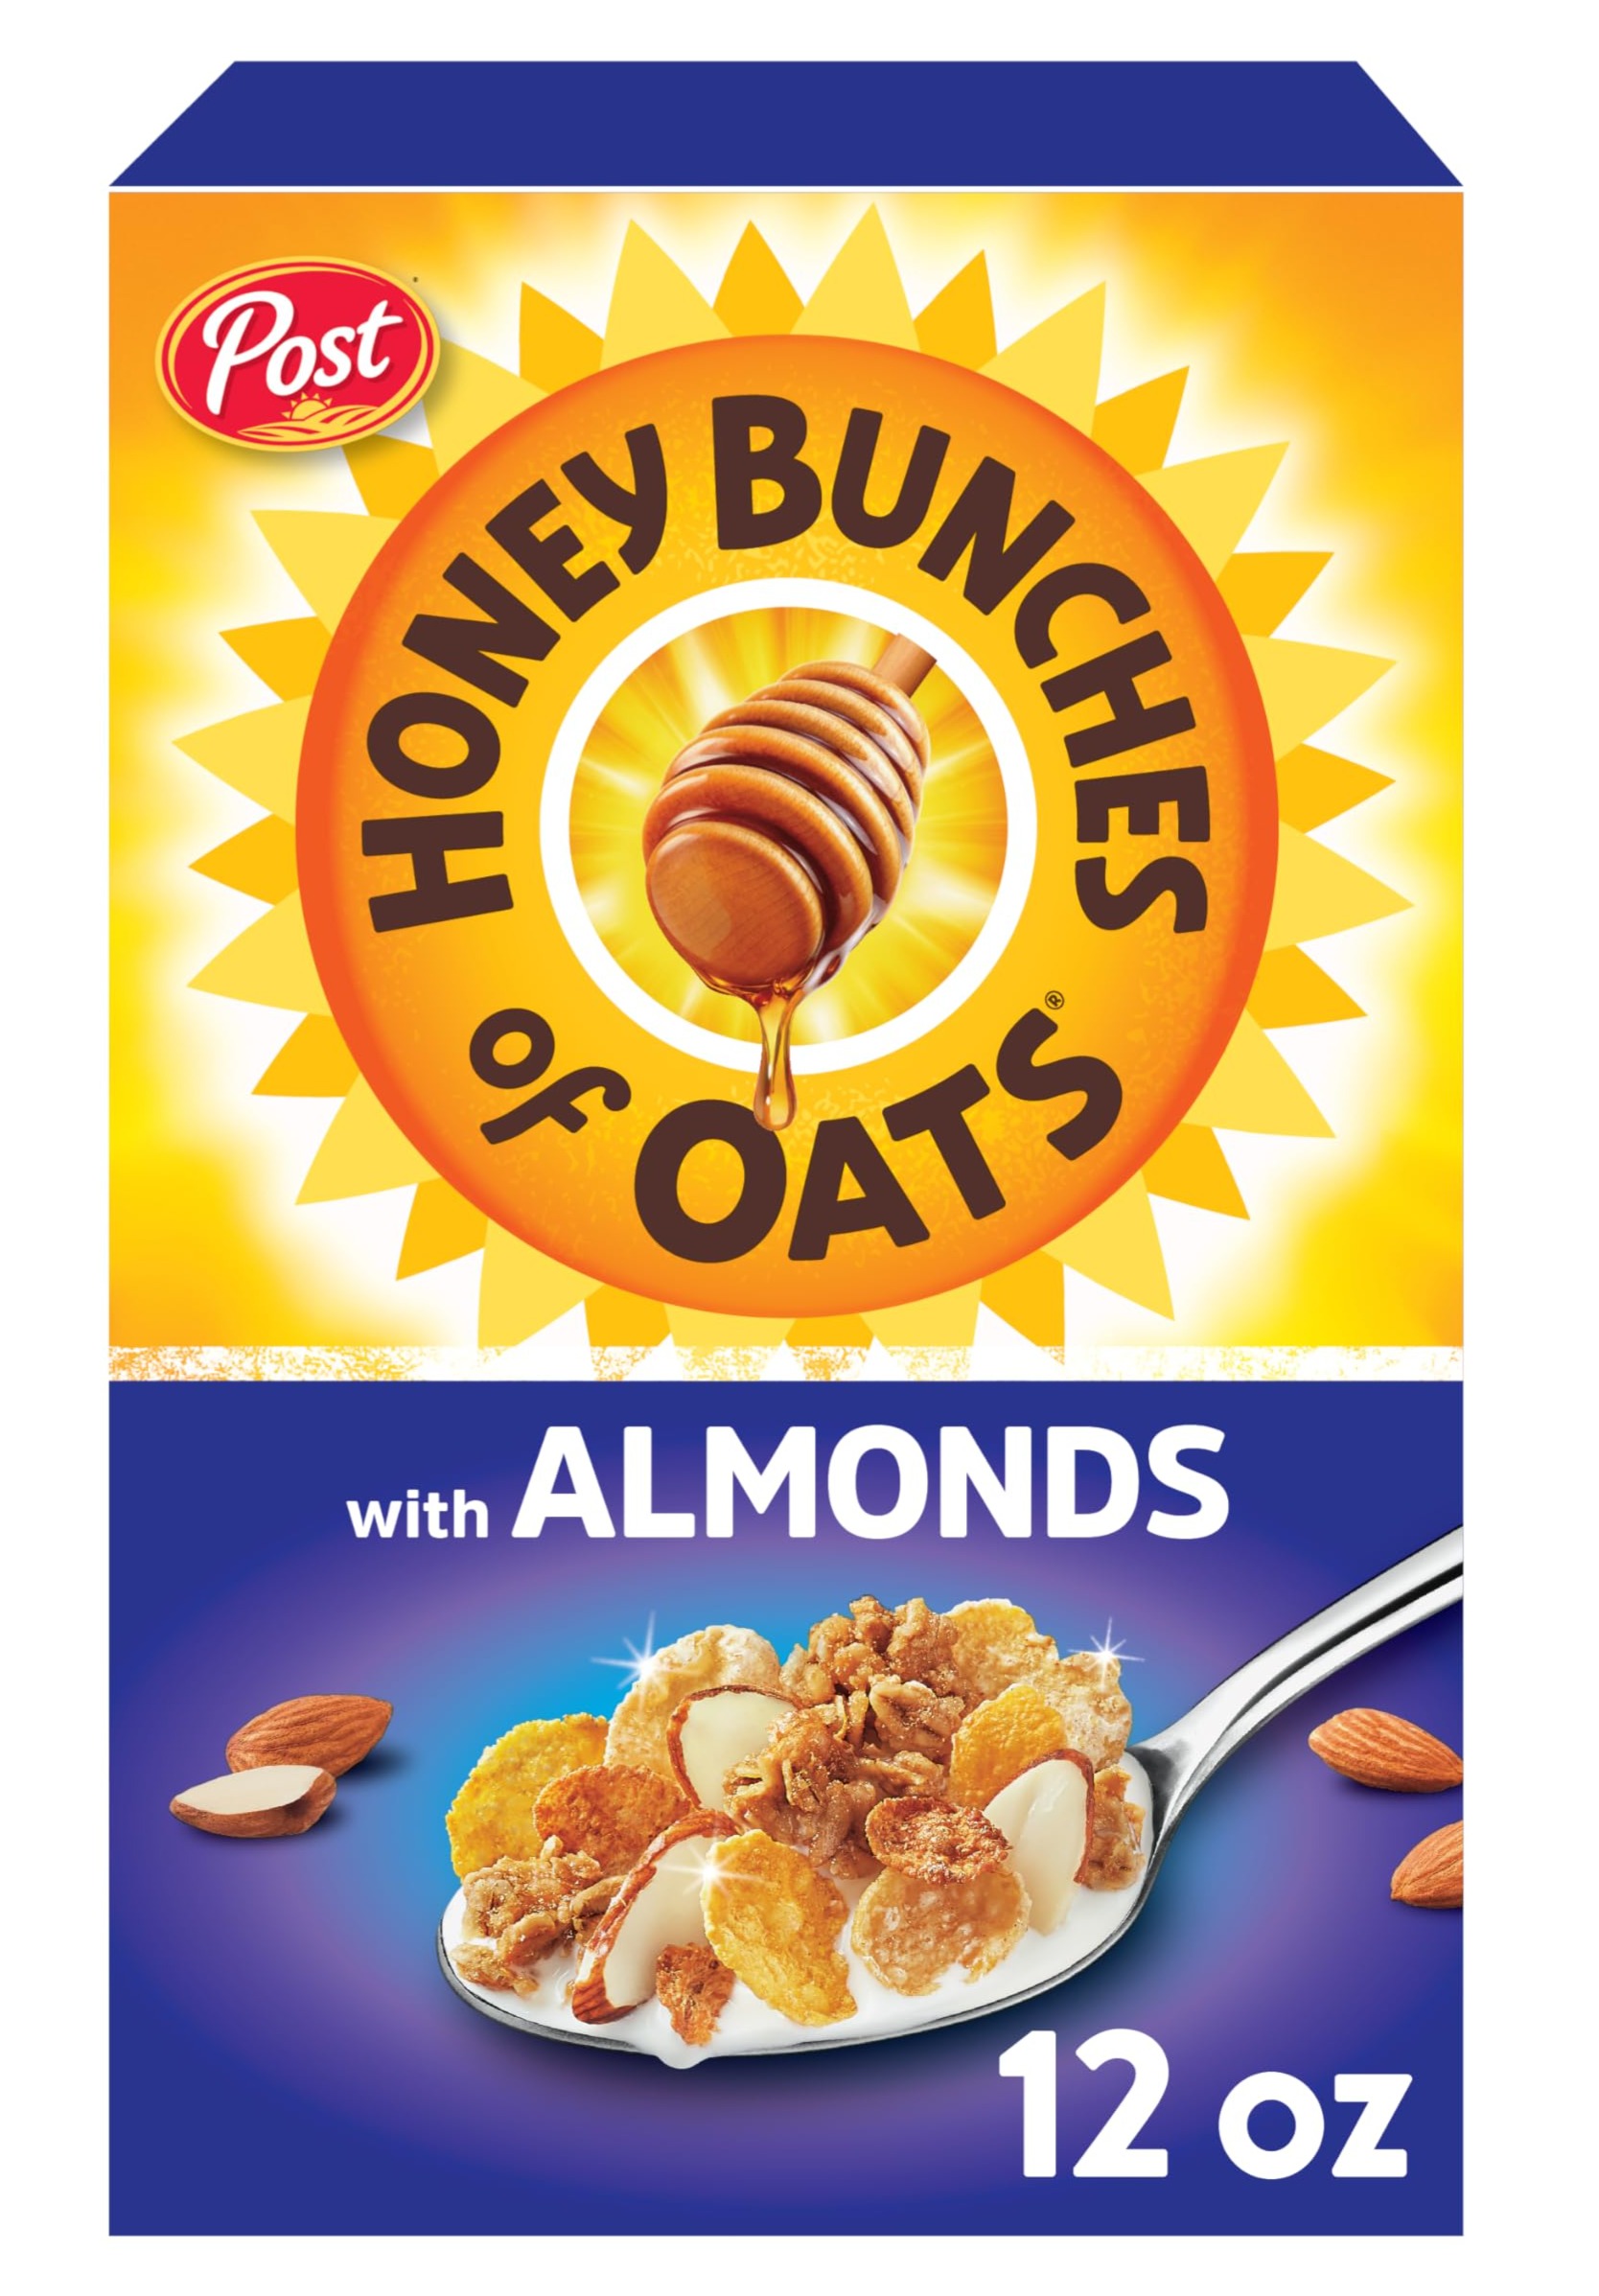 Honey Bunches of Oats with Almonds Breakfast Cereal, Honey Cereal with Granola Clusters and Sliced Almonds, 12 OZ Box $1.54